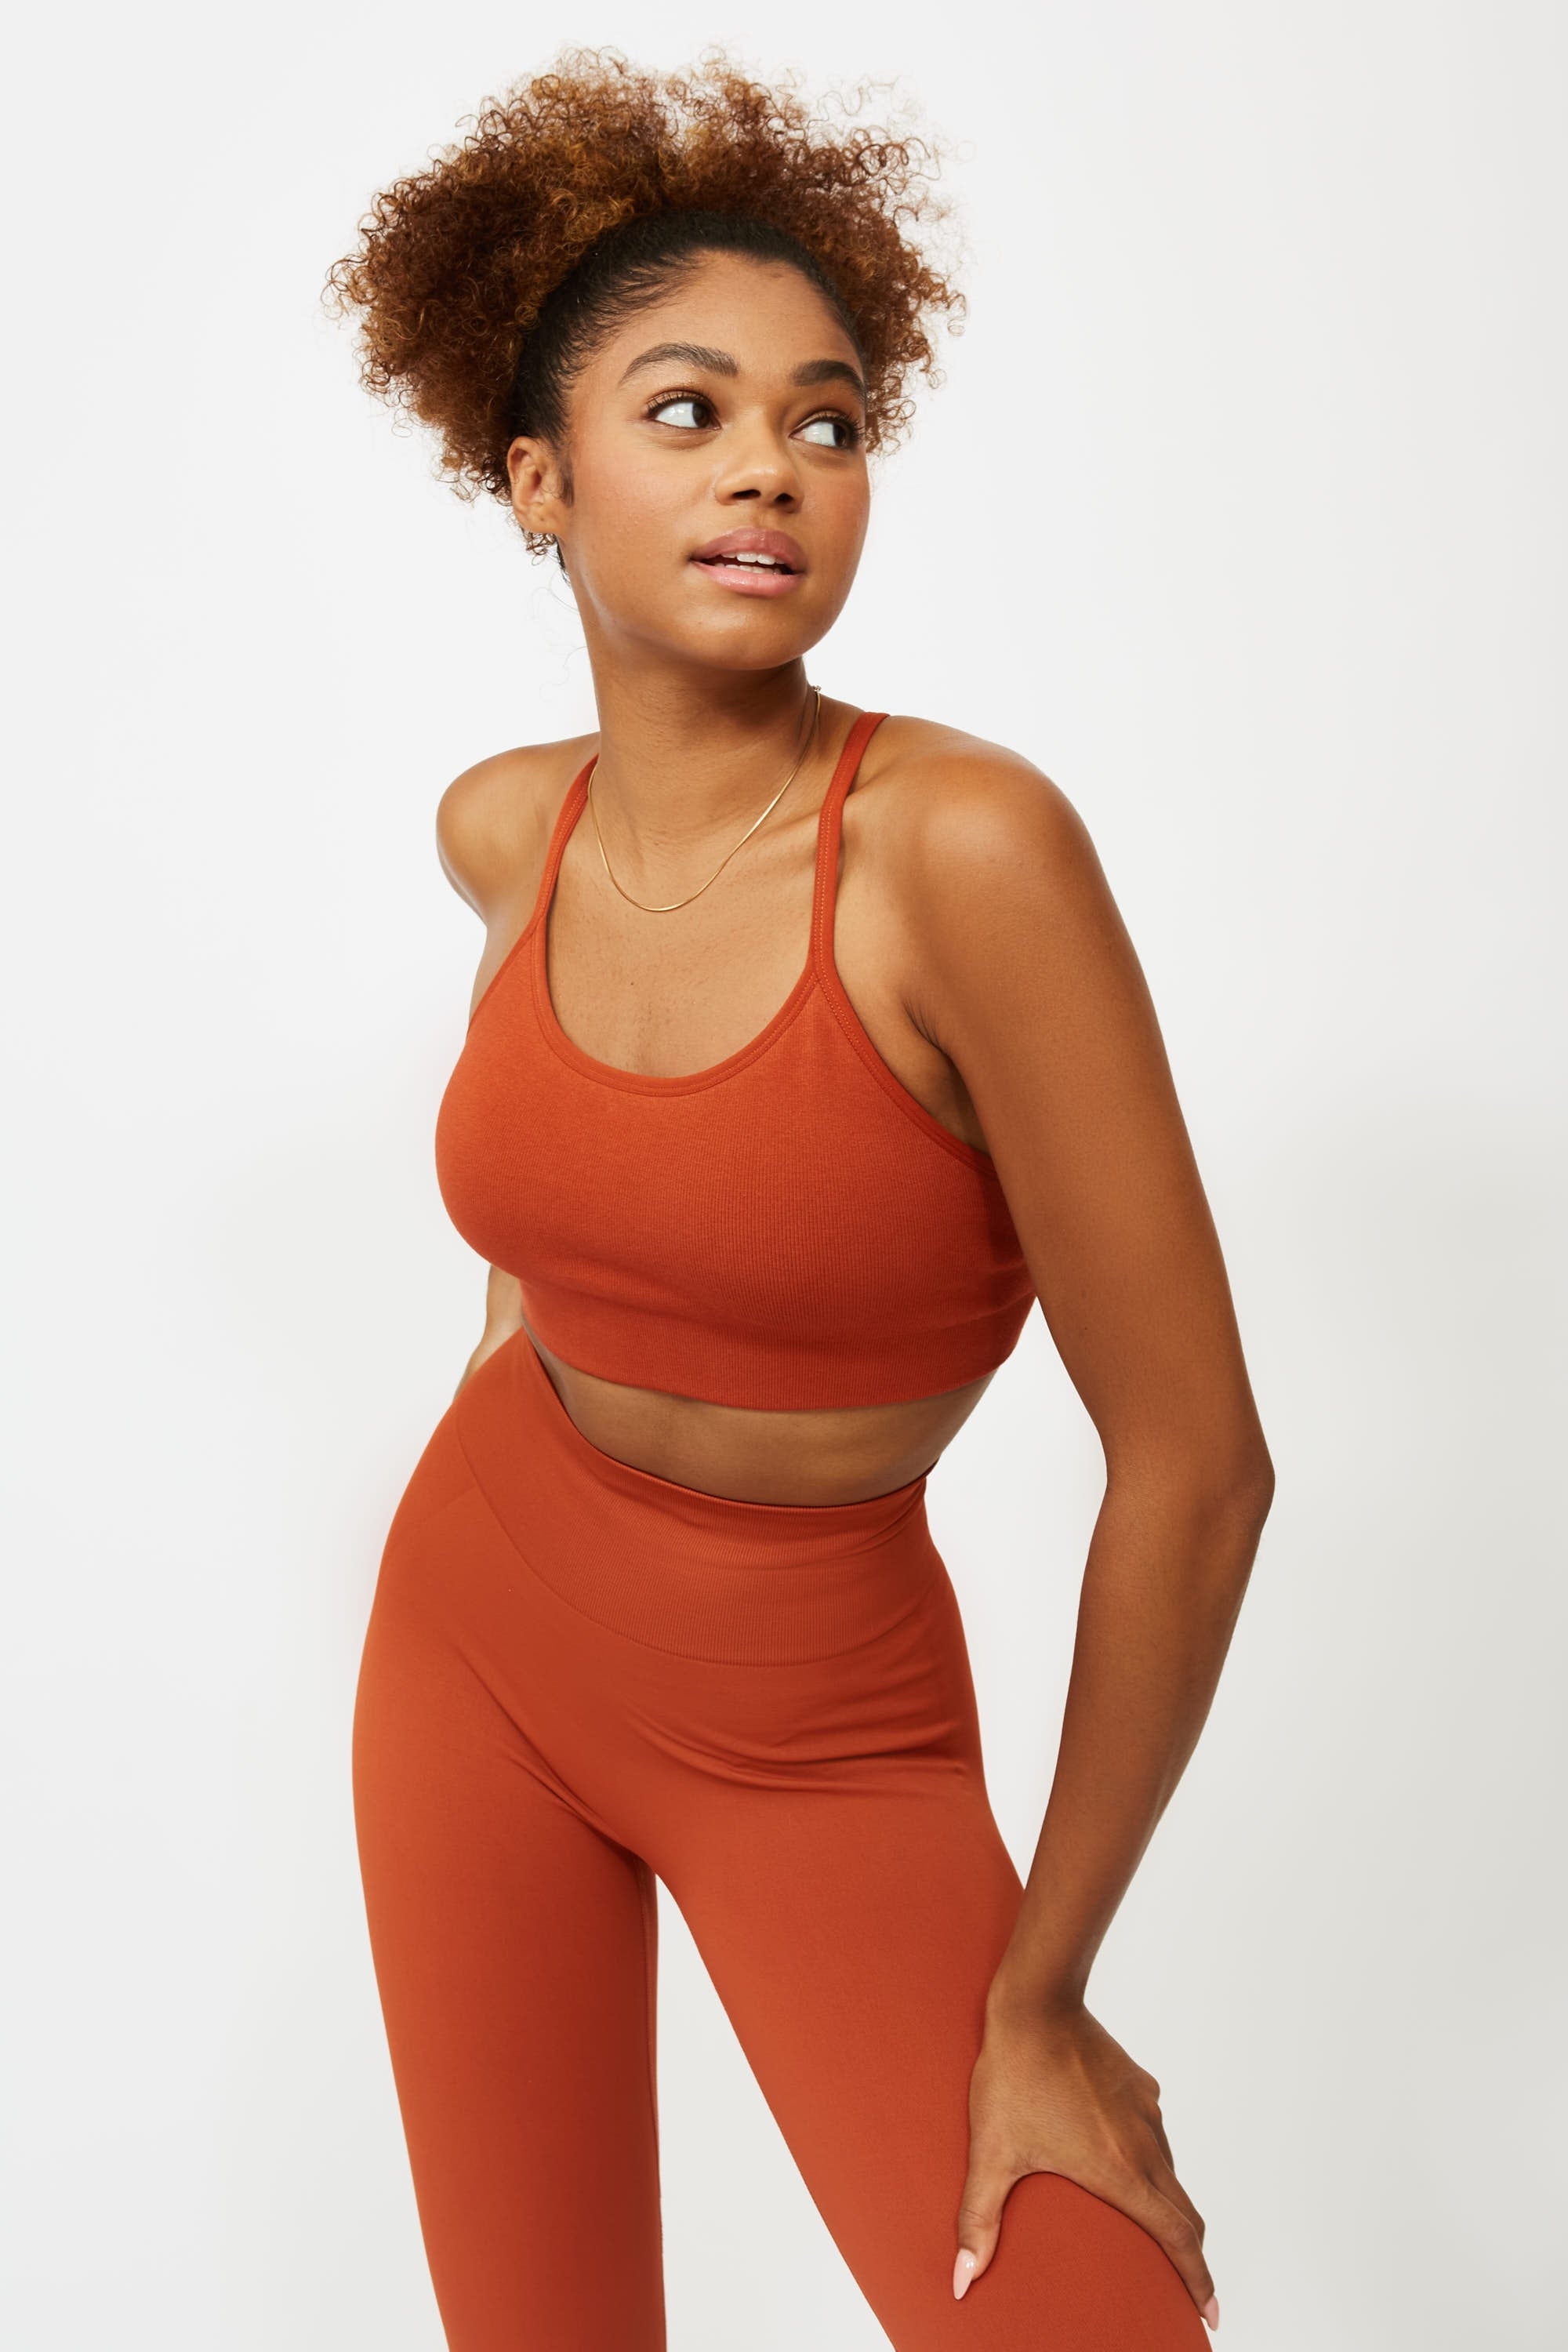 Model wearing orange colour supportive sports bra for sustainable activewear brand, Jilla